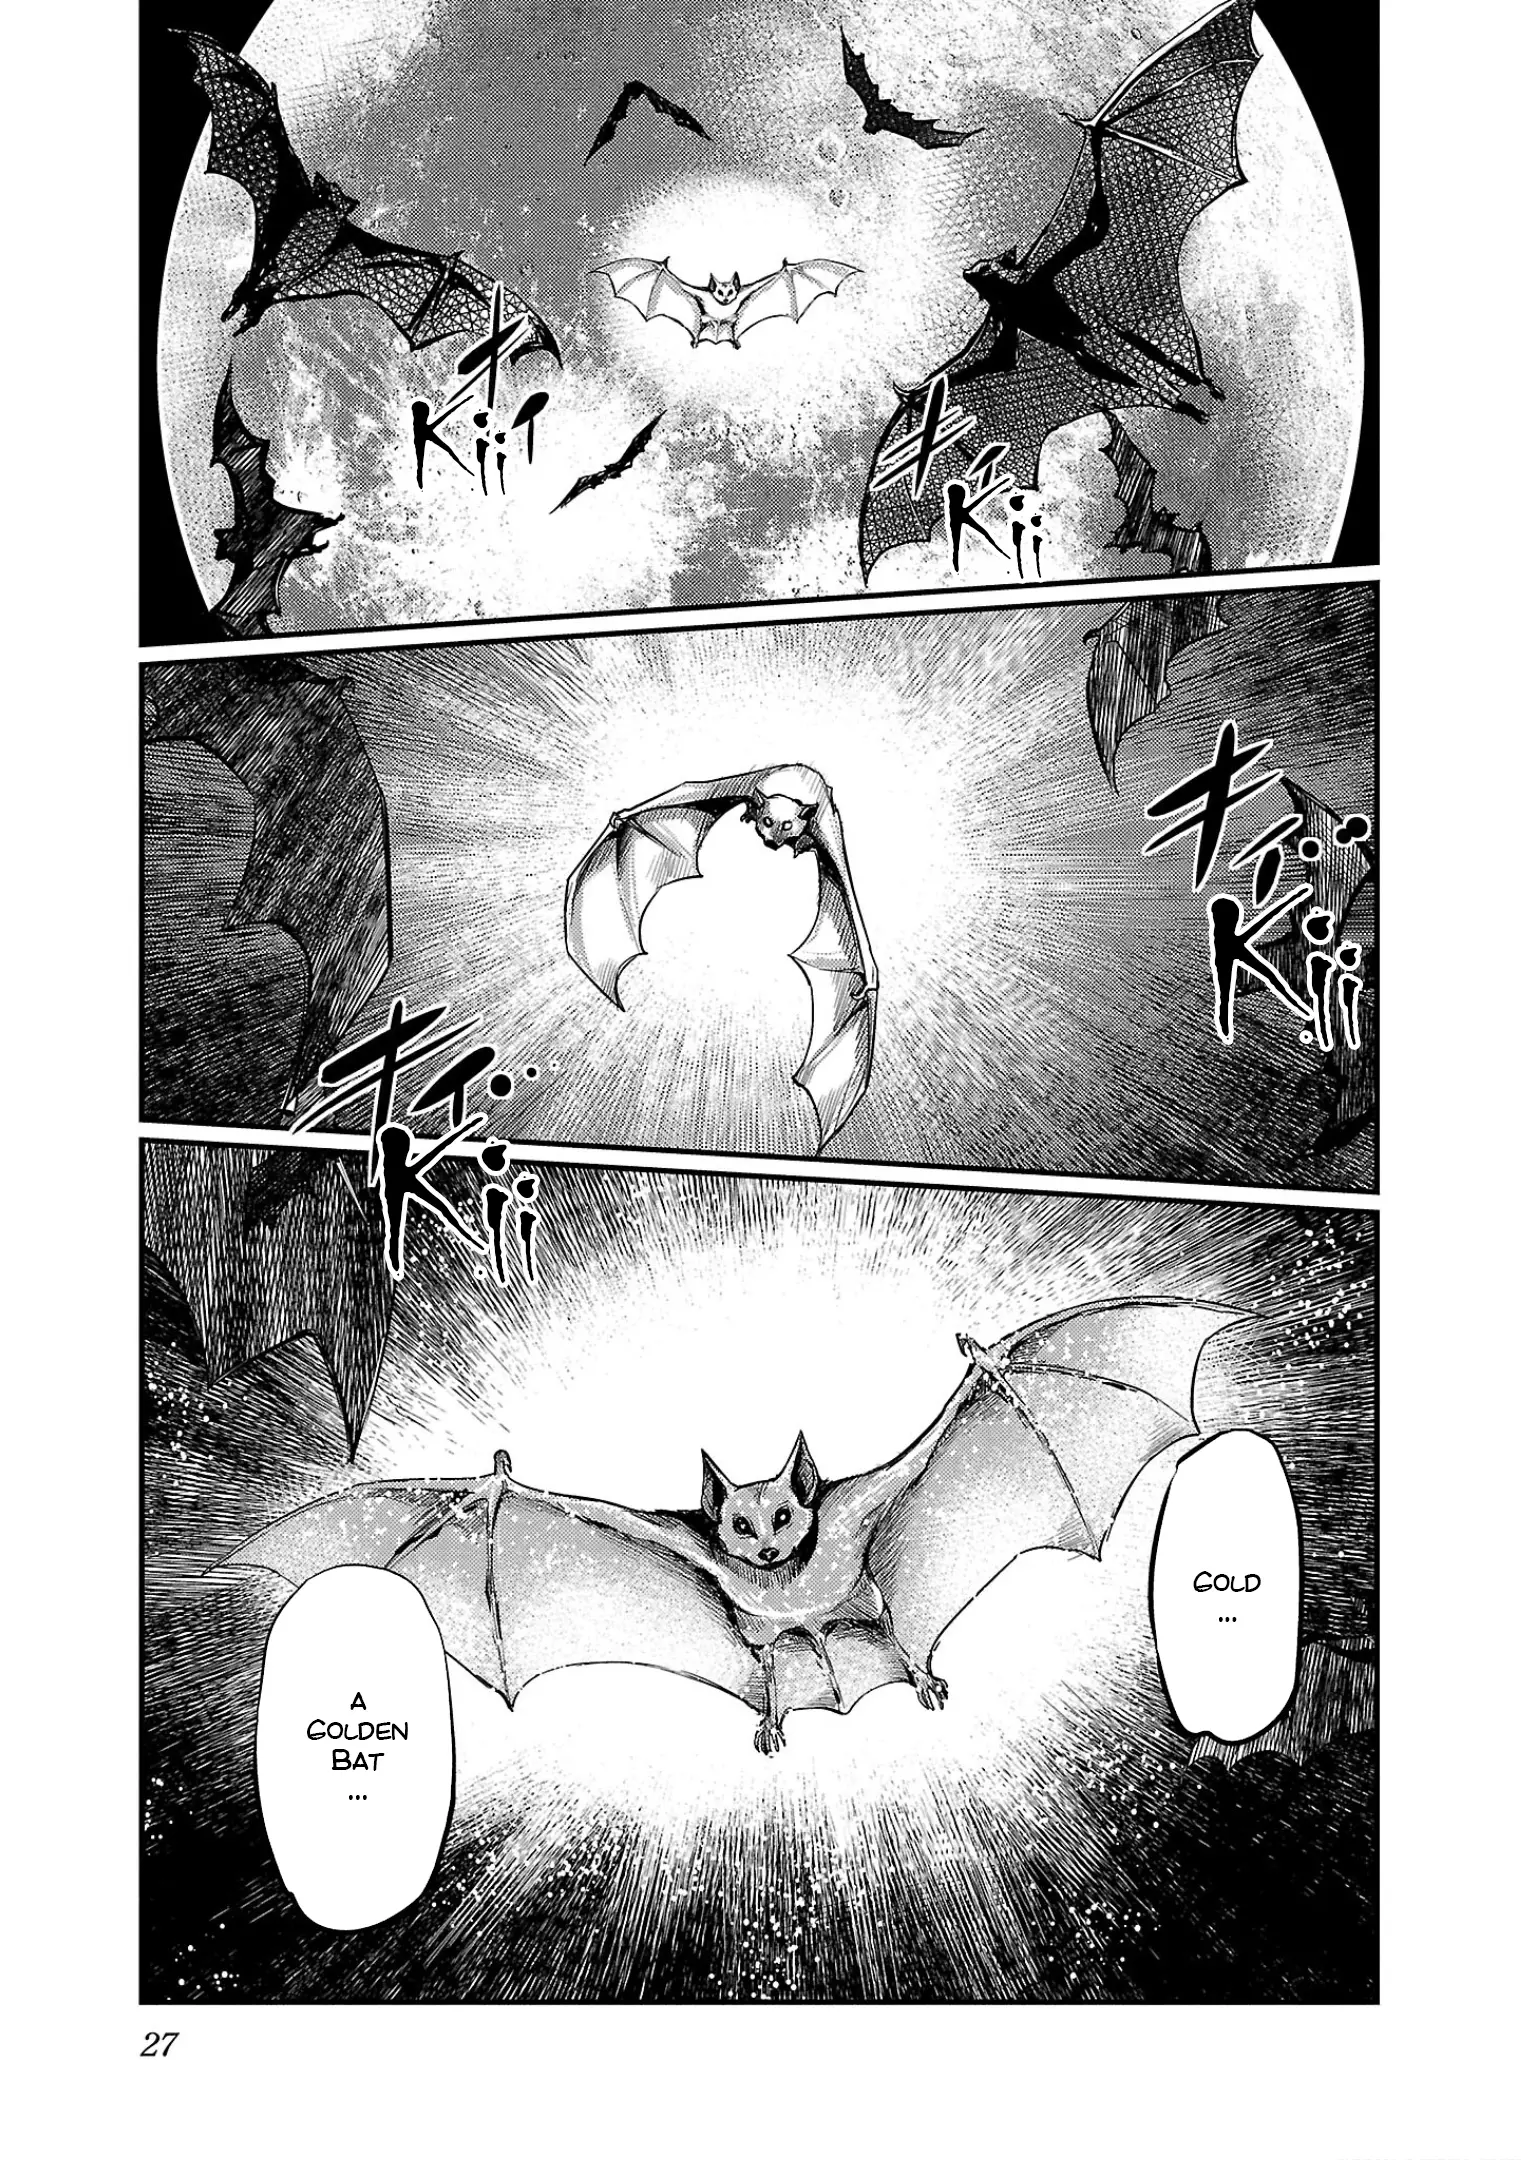 Golden Bat - A Mysterious Story Of The Taisho Era's Skull - 1 page 27-3ee41183